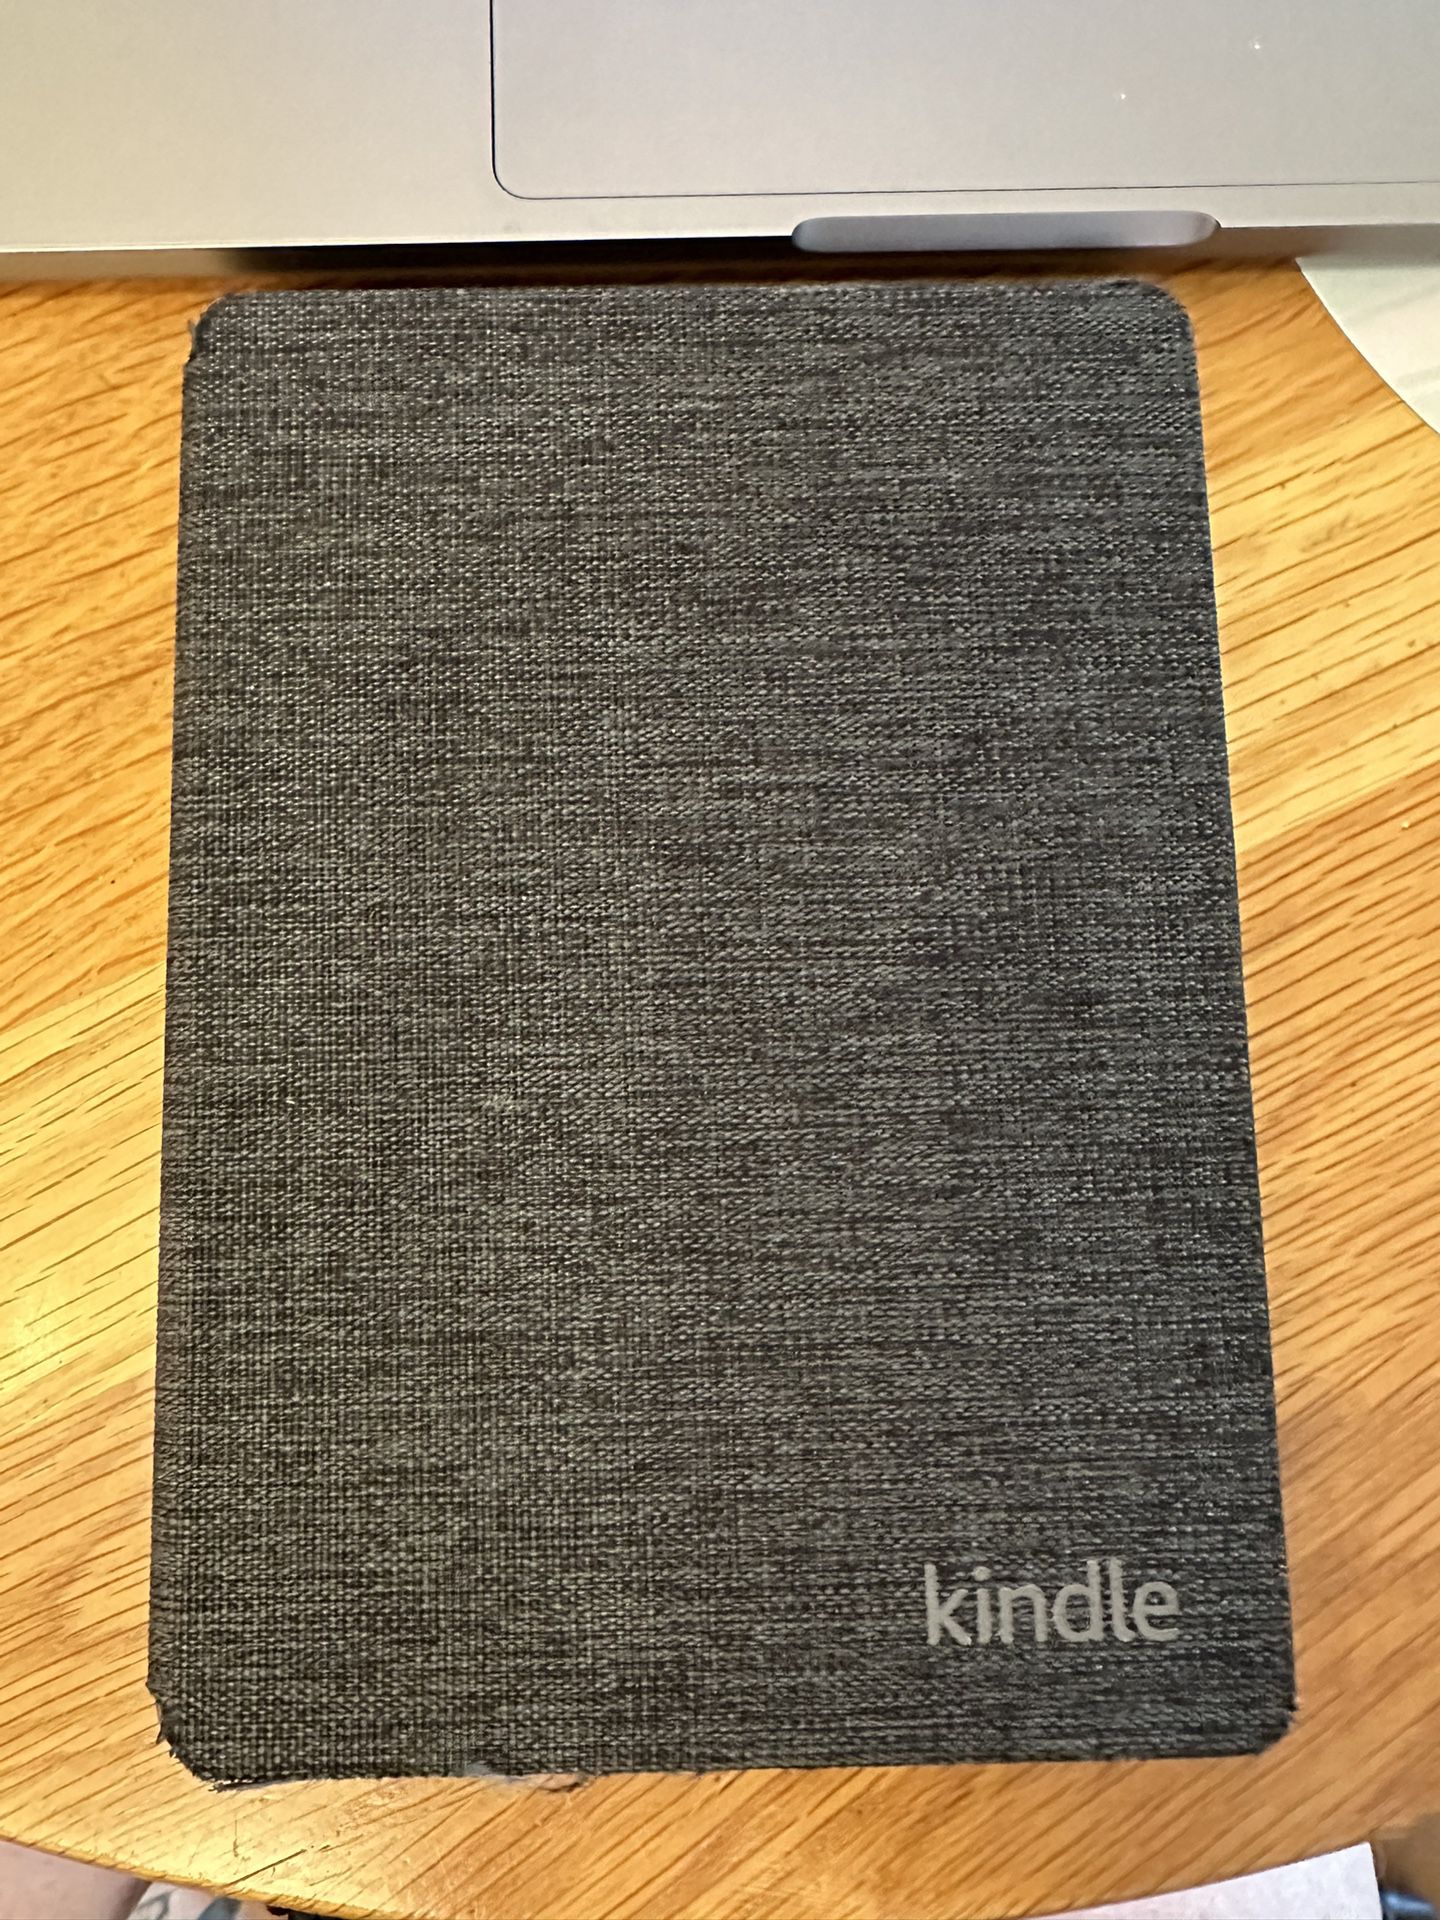 Kindle Paperwhite 11th Generation - w/Cover